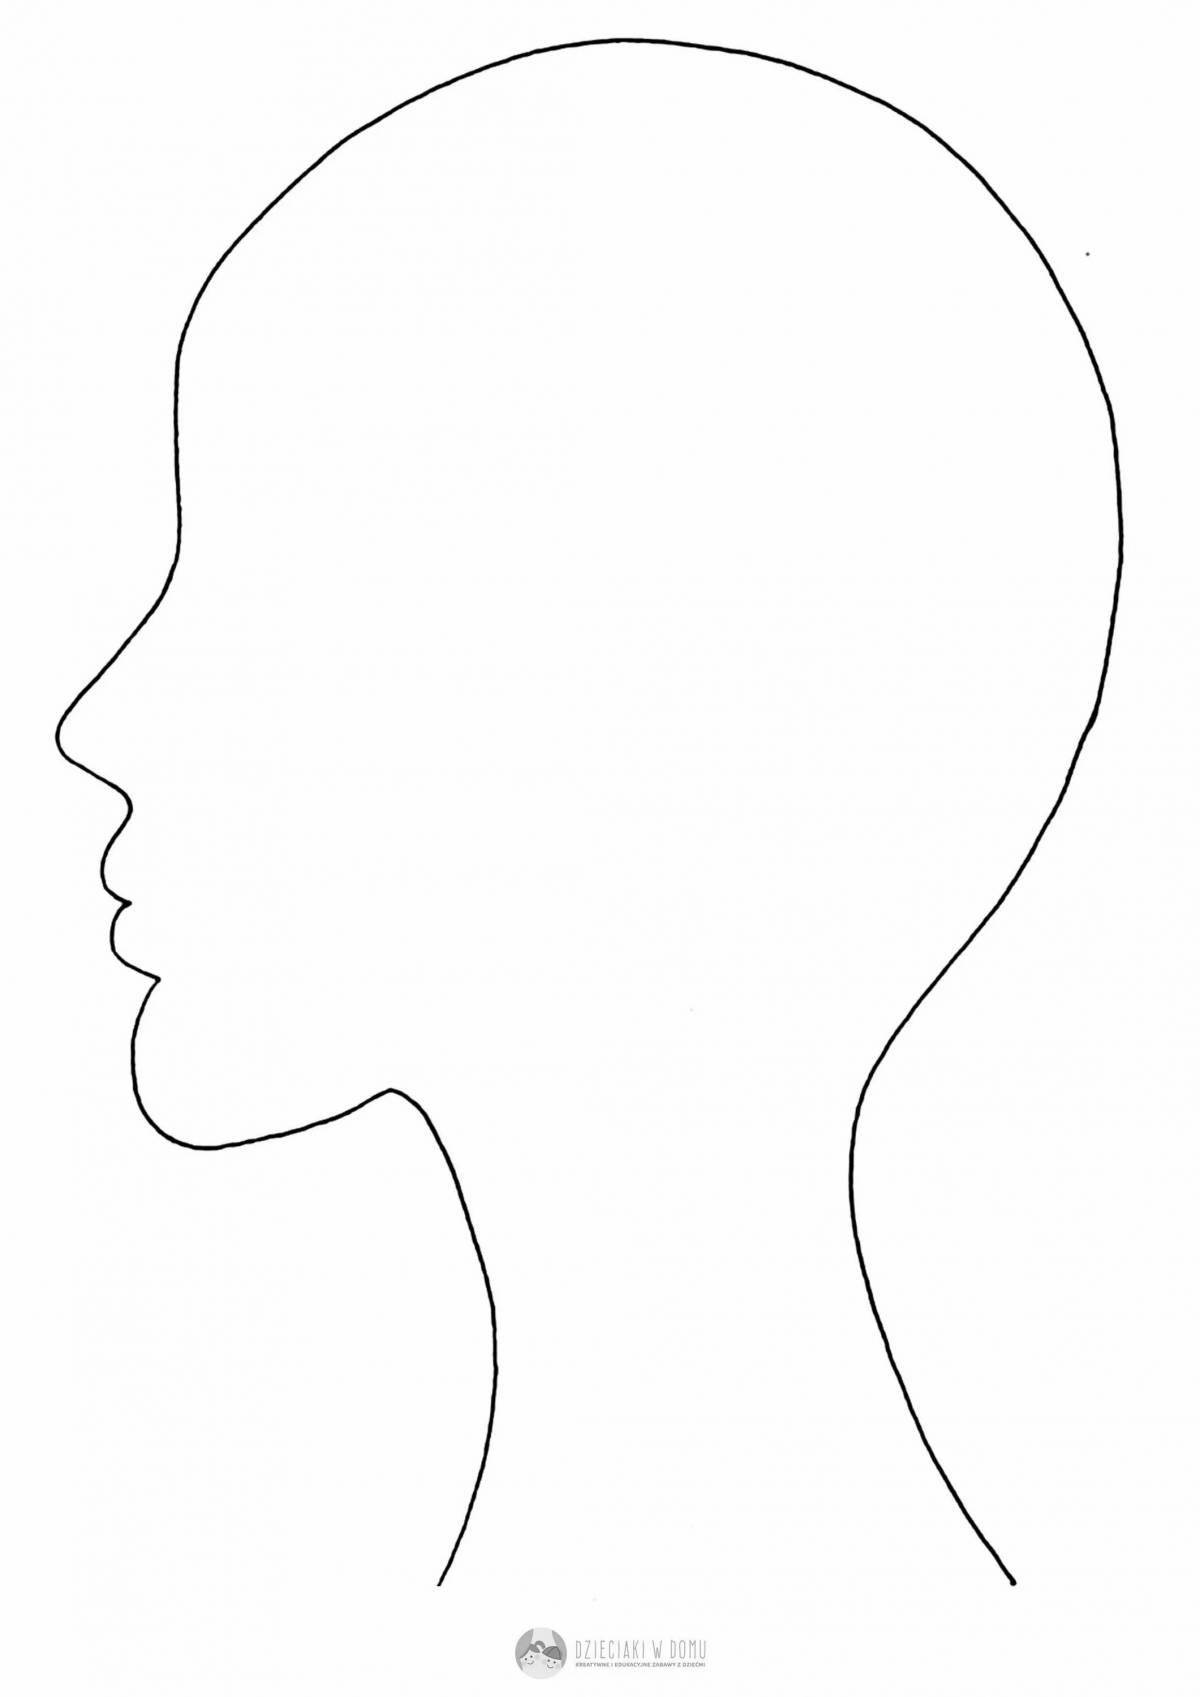 Face coloring page with happy profile